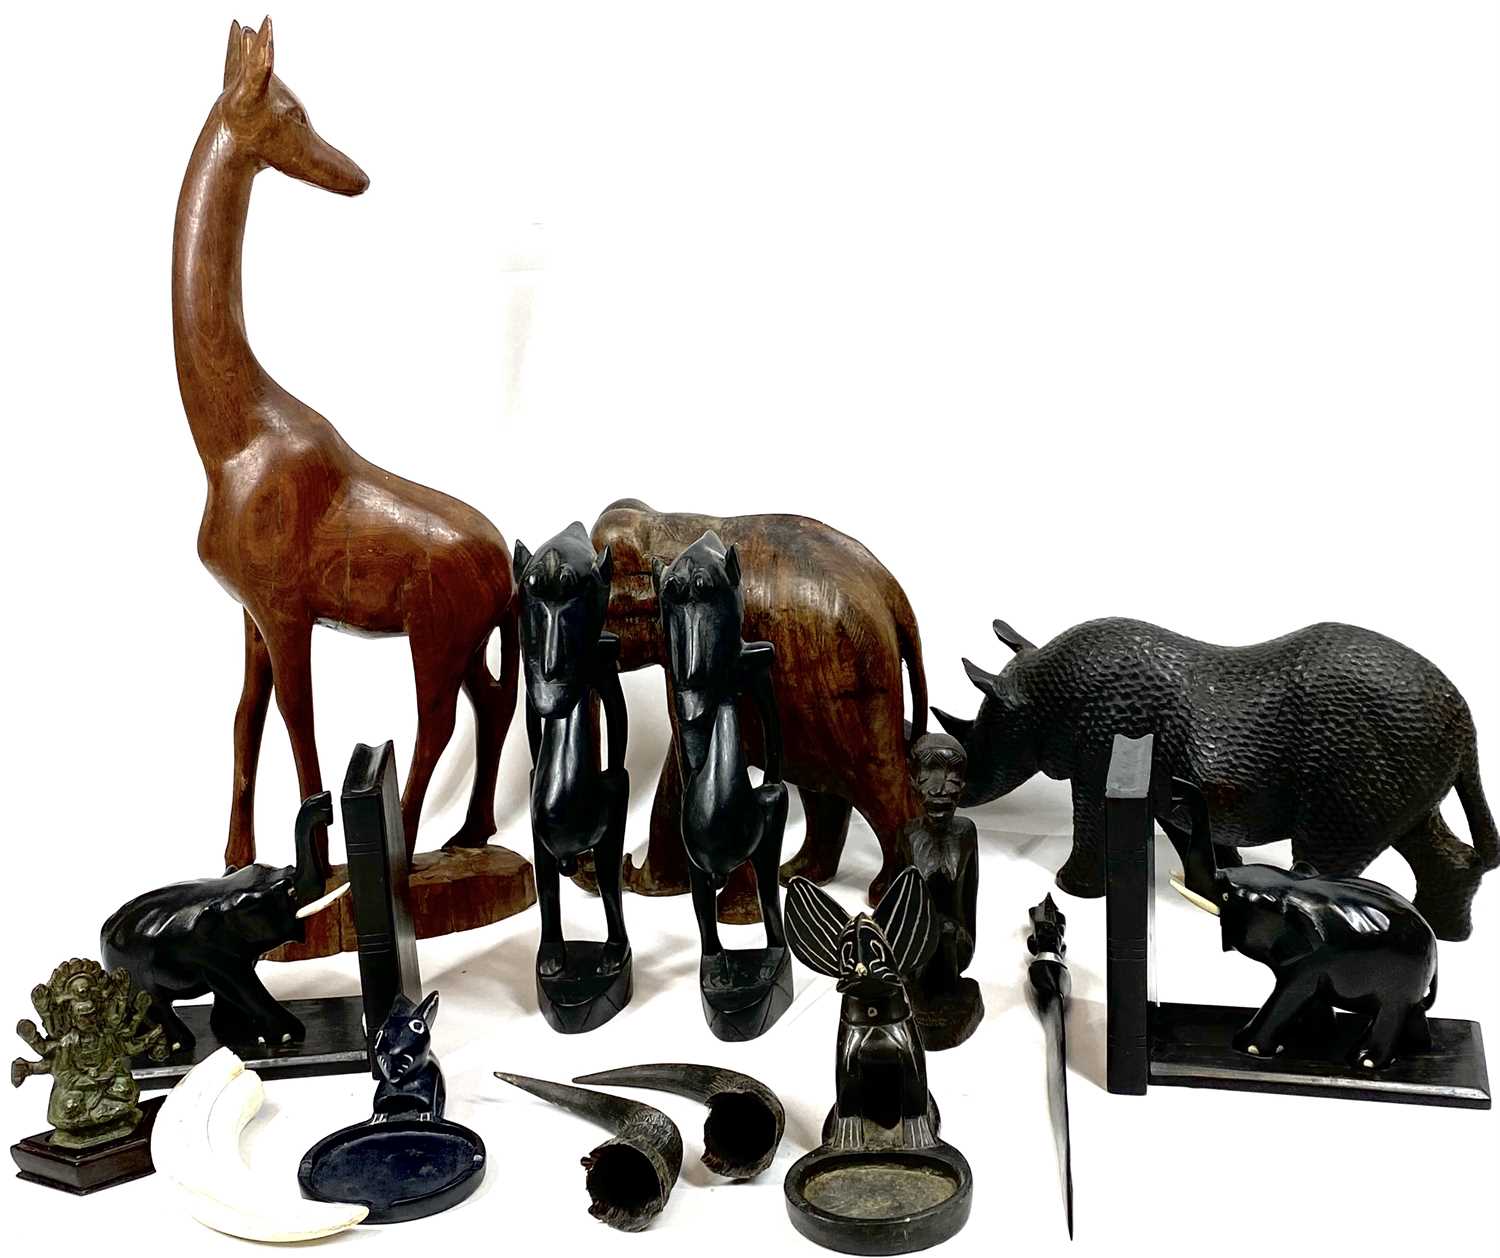 EBONY & OTHER WOODS ETHNIC CARVINGS and collectables to include a 14cms H, 35cms L rhinoceros, ebony